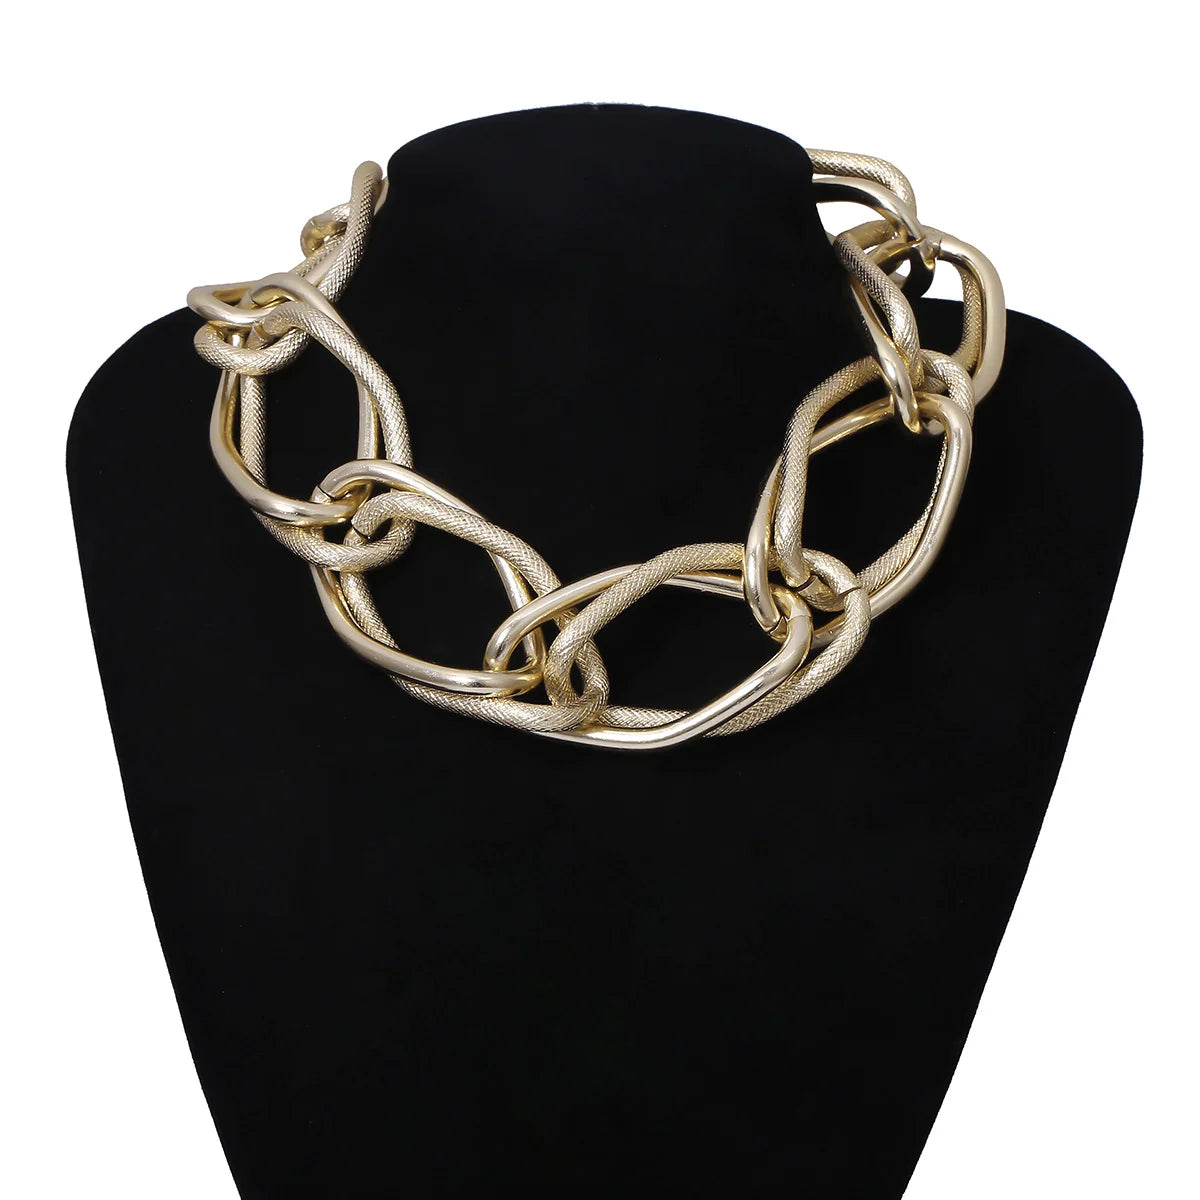 Fashion thick chain necklace